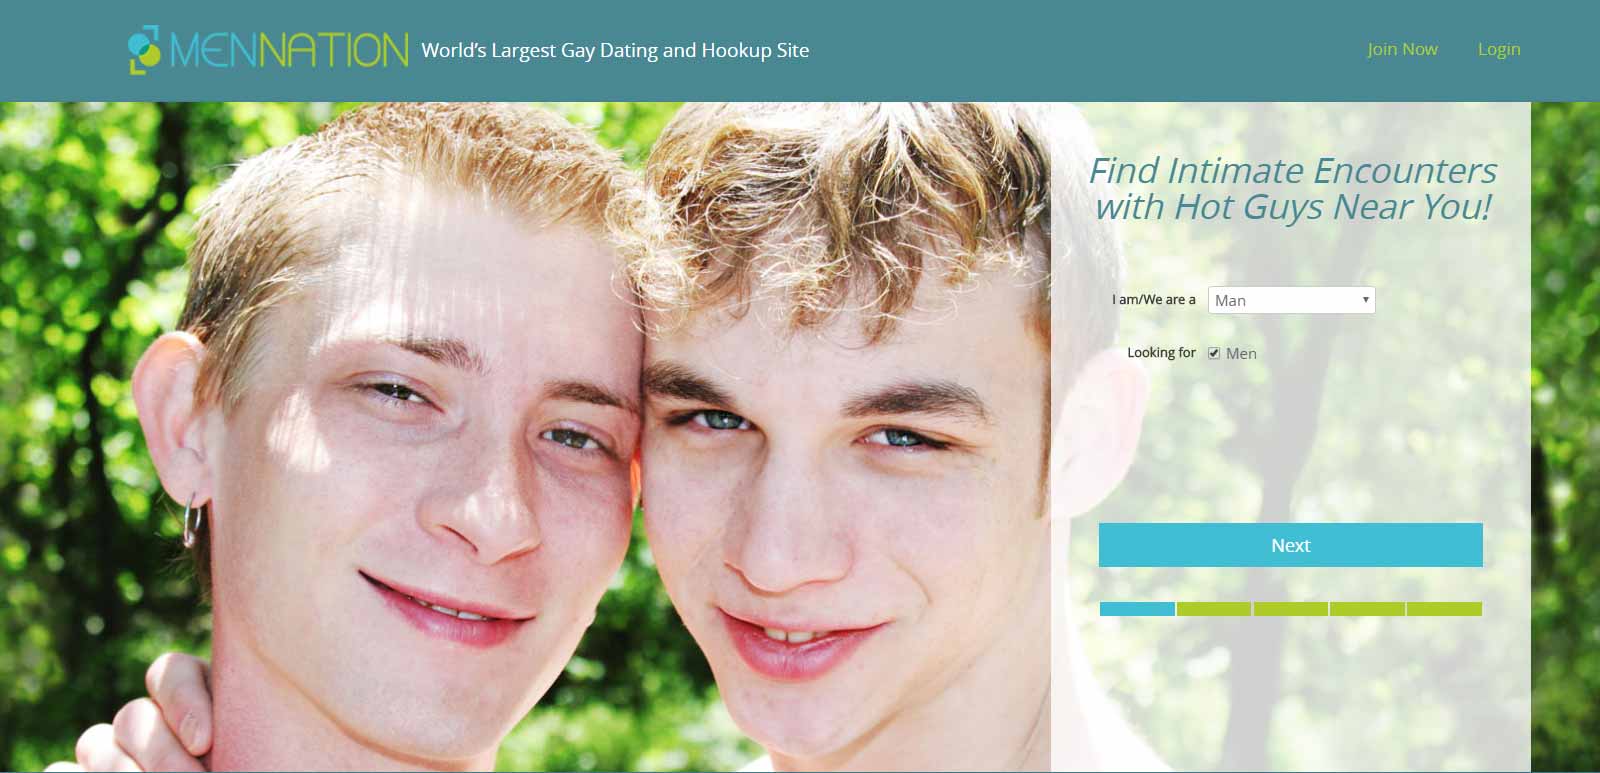 Online dating for gays